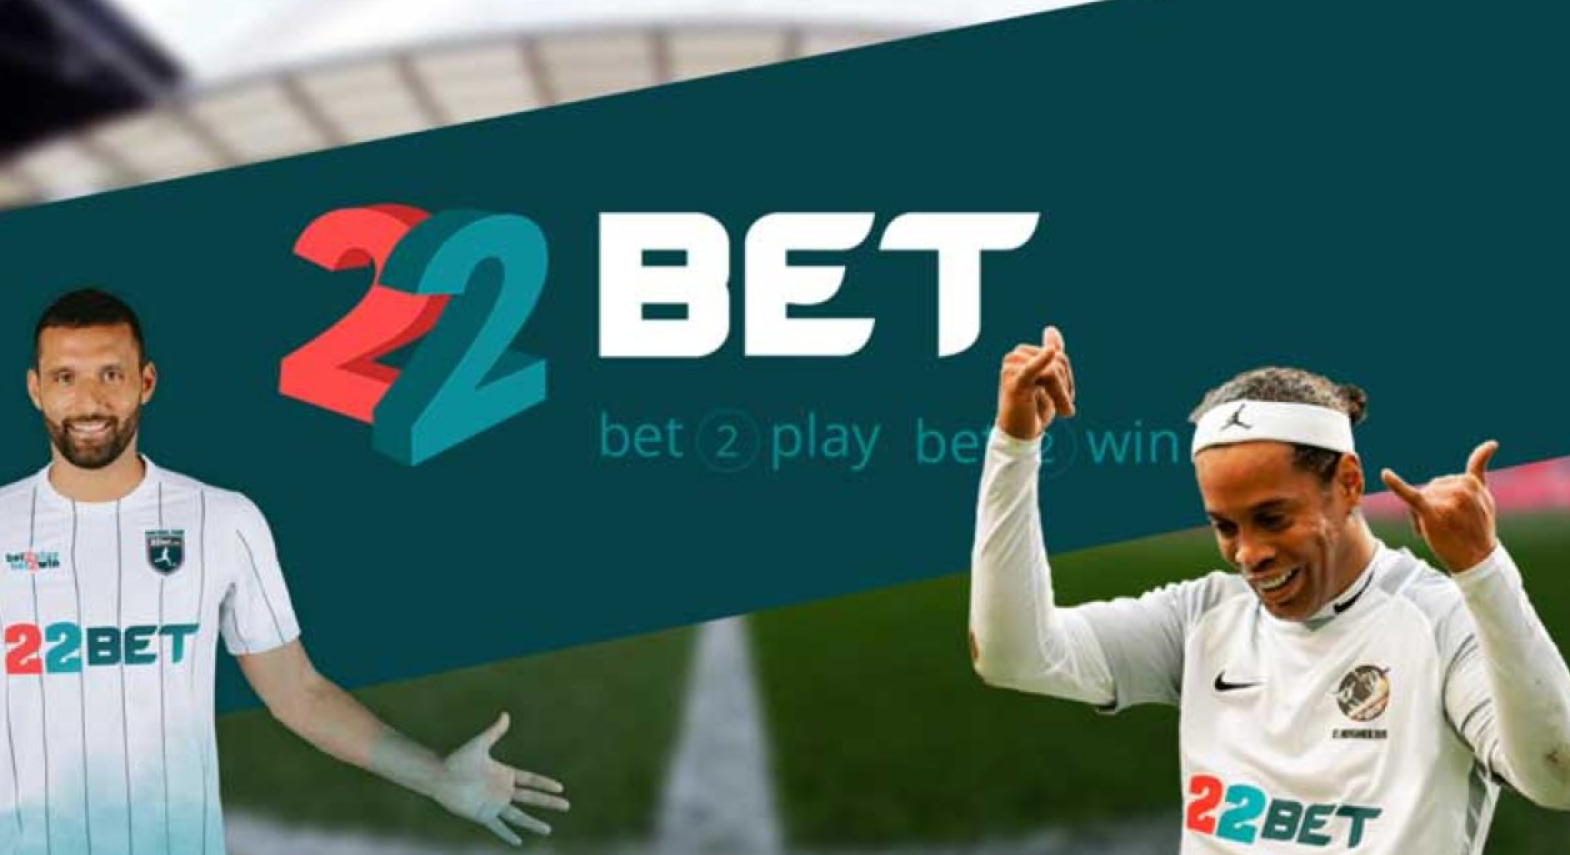 Advantages of sports betting within 22Bet